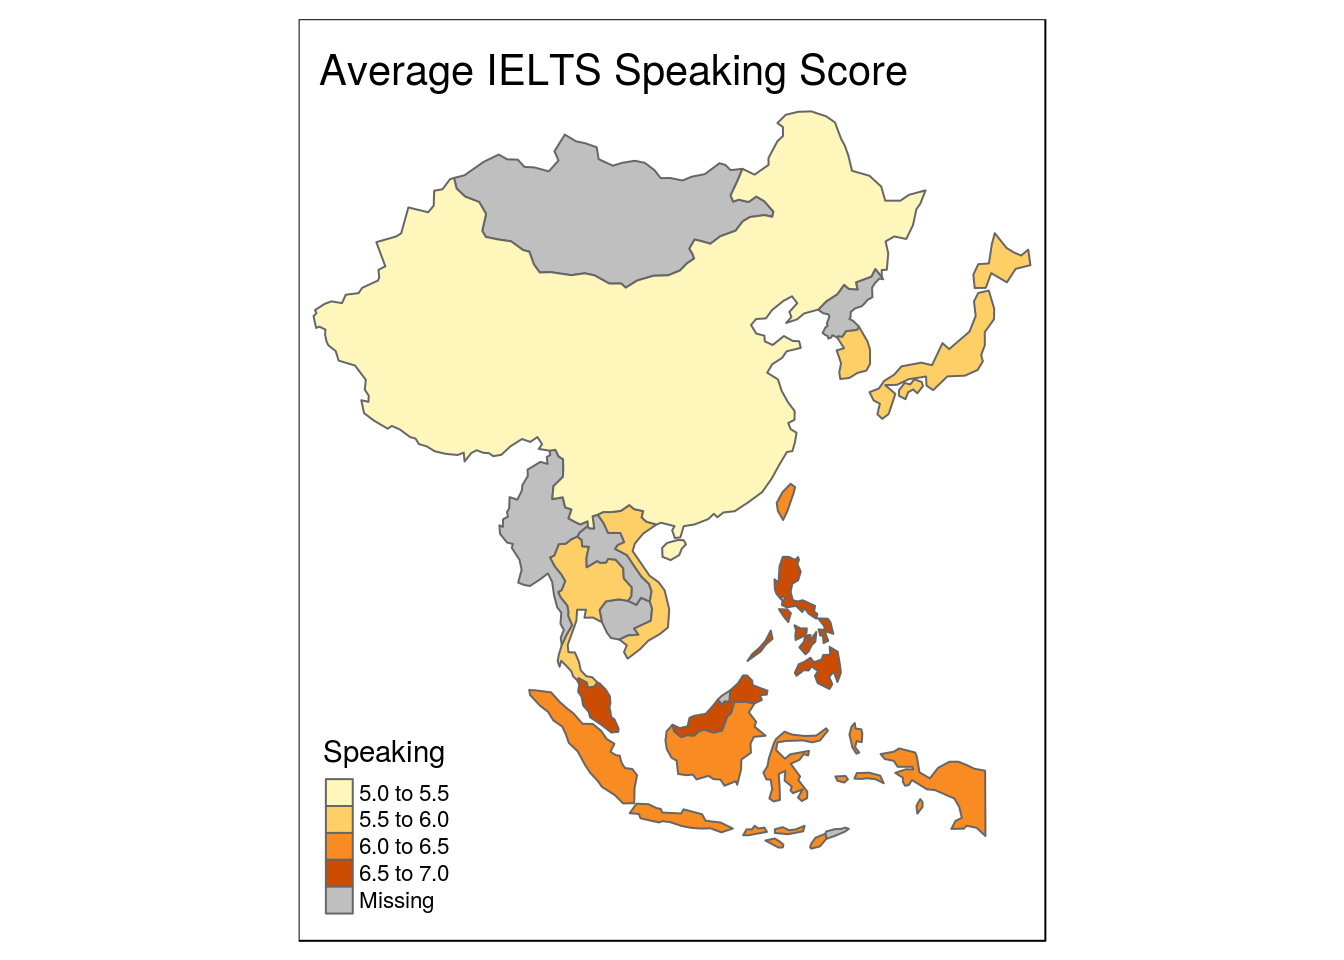 Communicating IELTS Averages with Maps - Part I